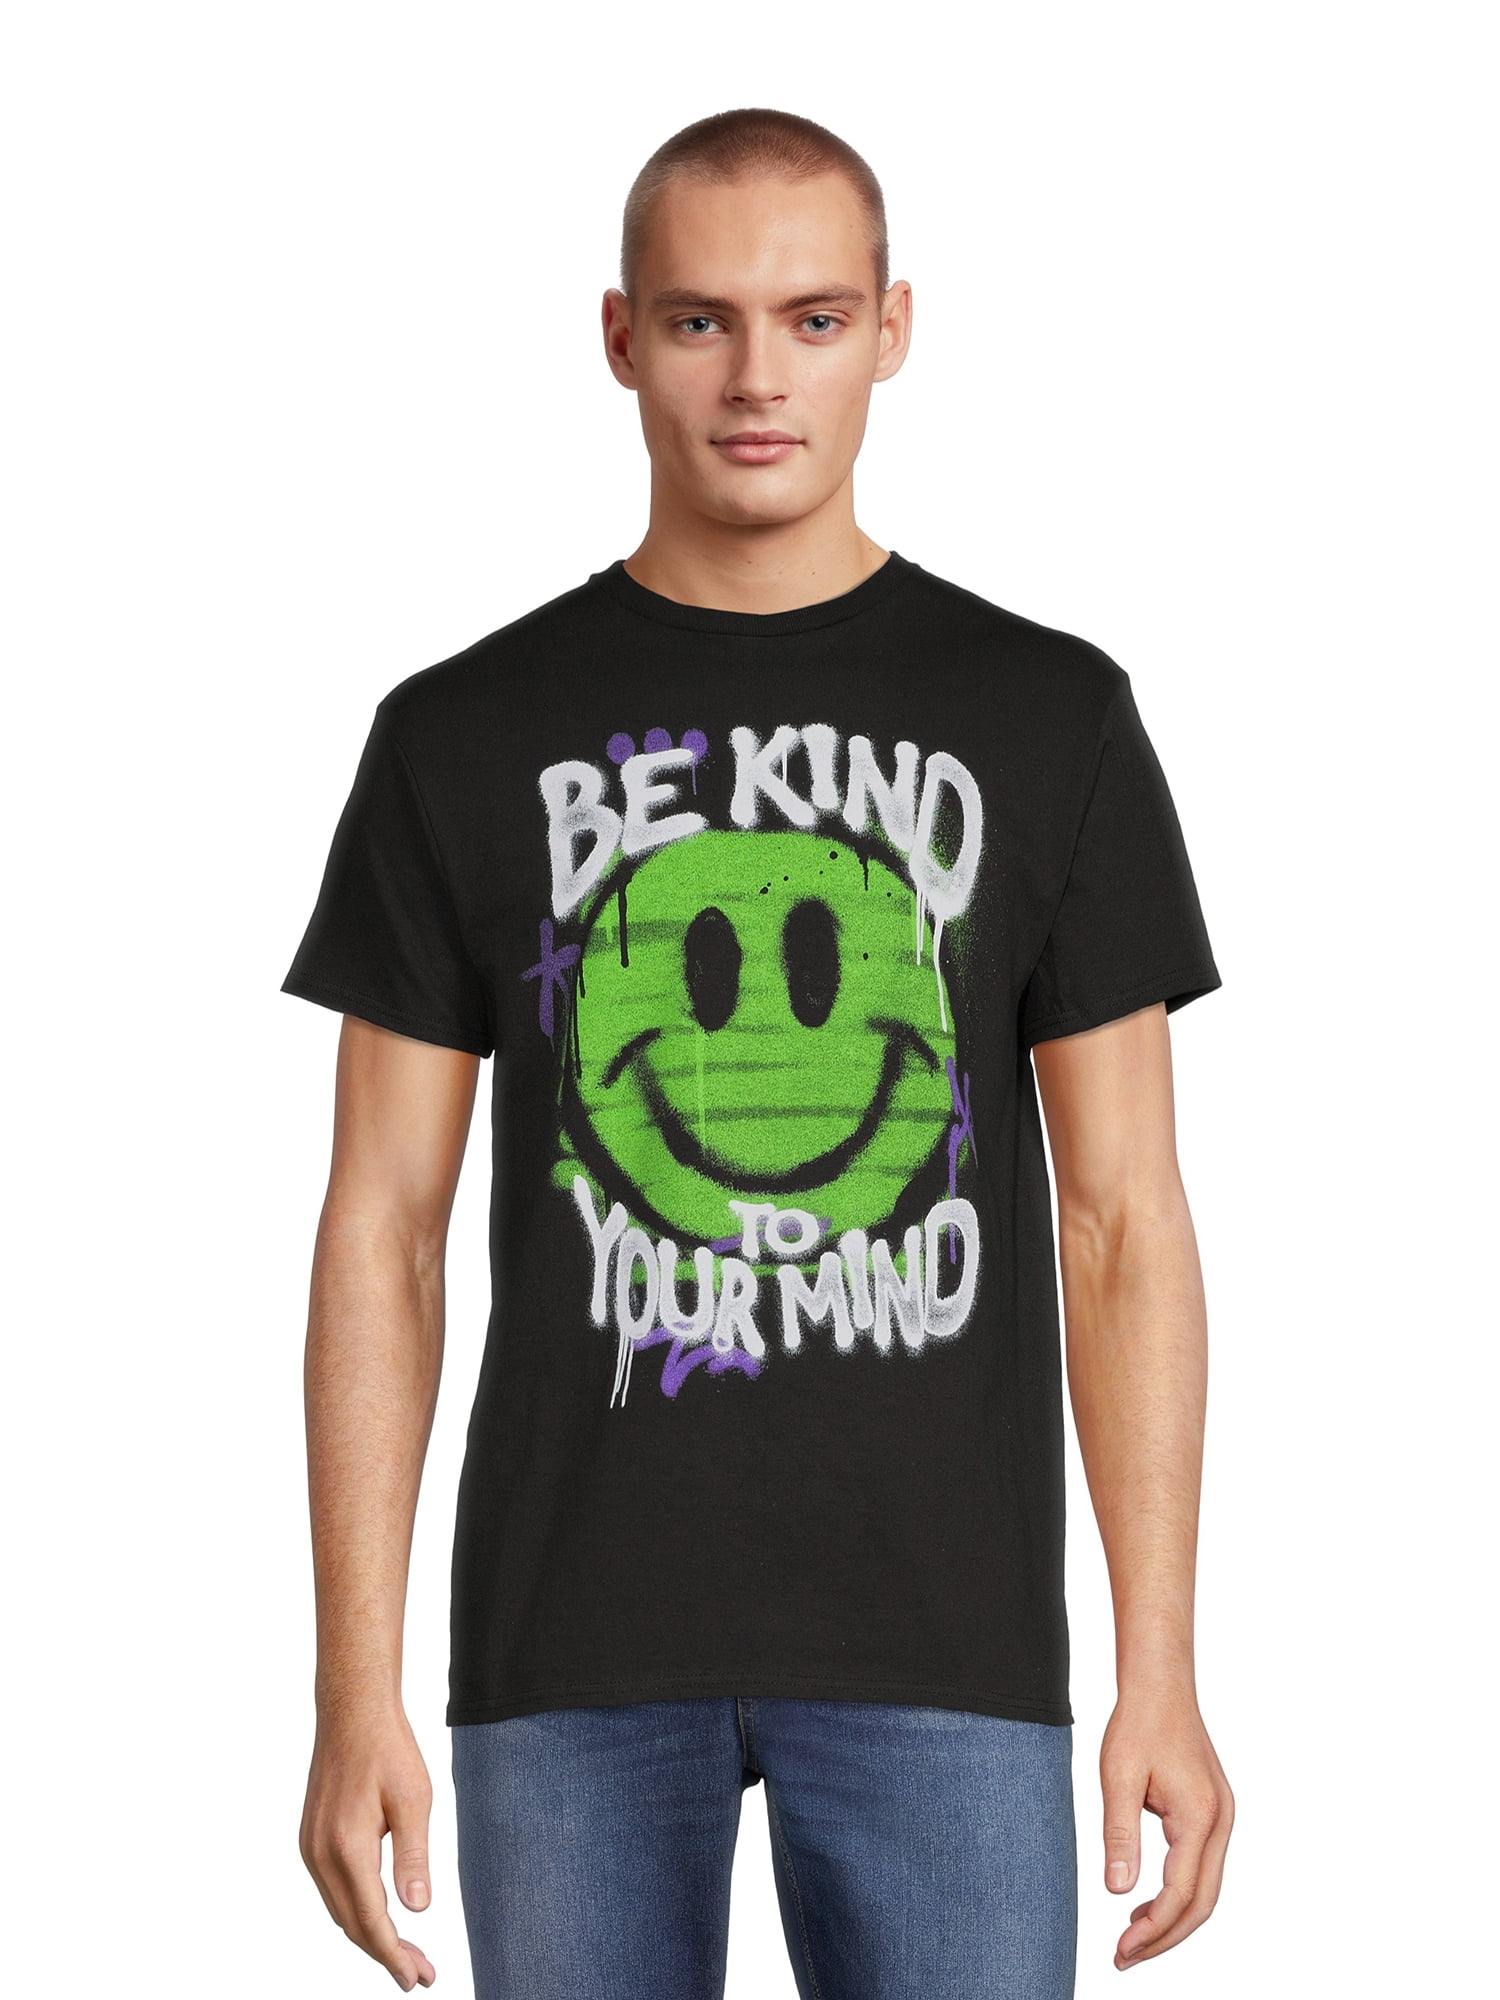 Kind Mind Men's Graphic Tee with Short Sleeves, Sizes S-3XL